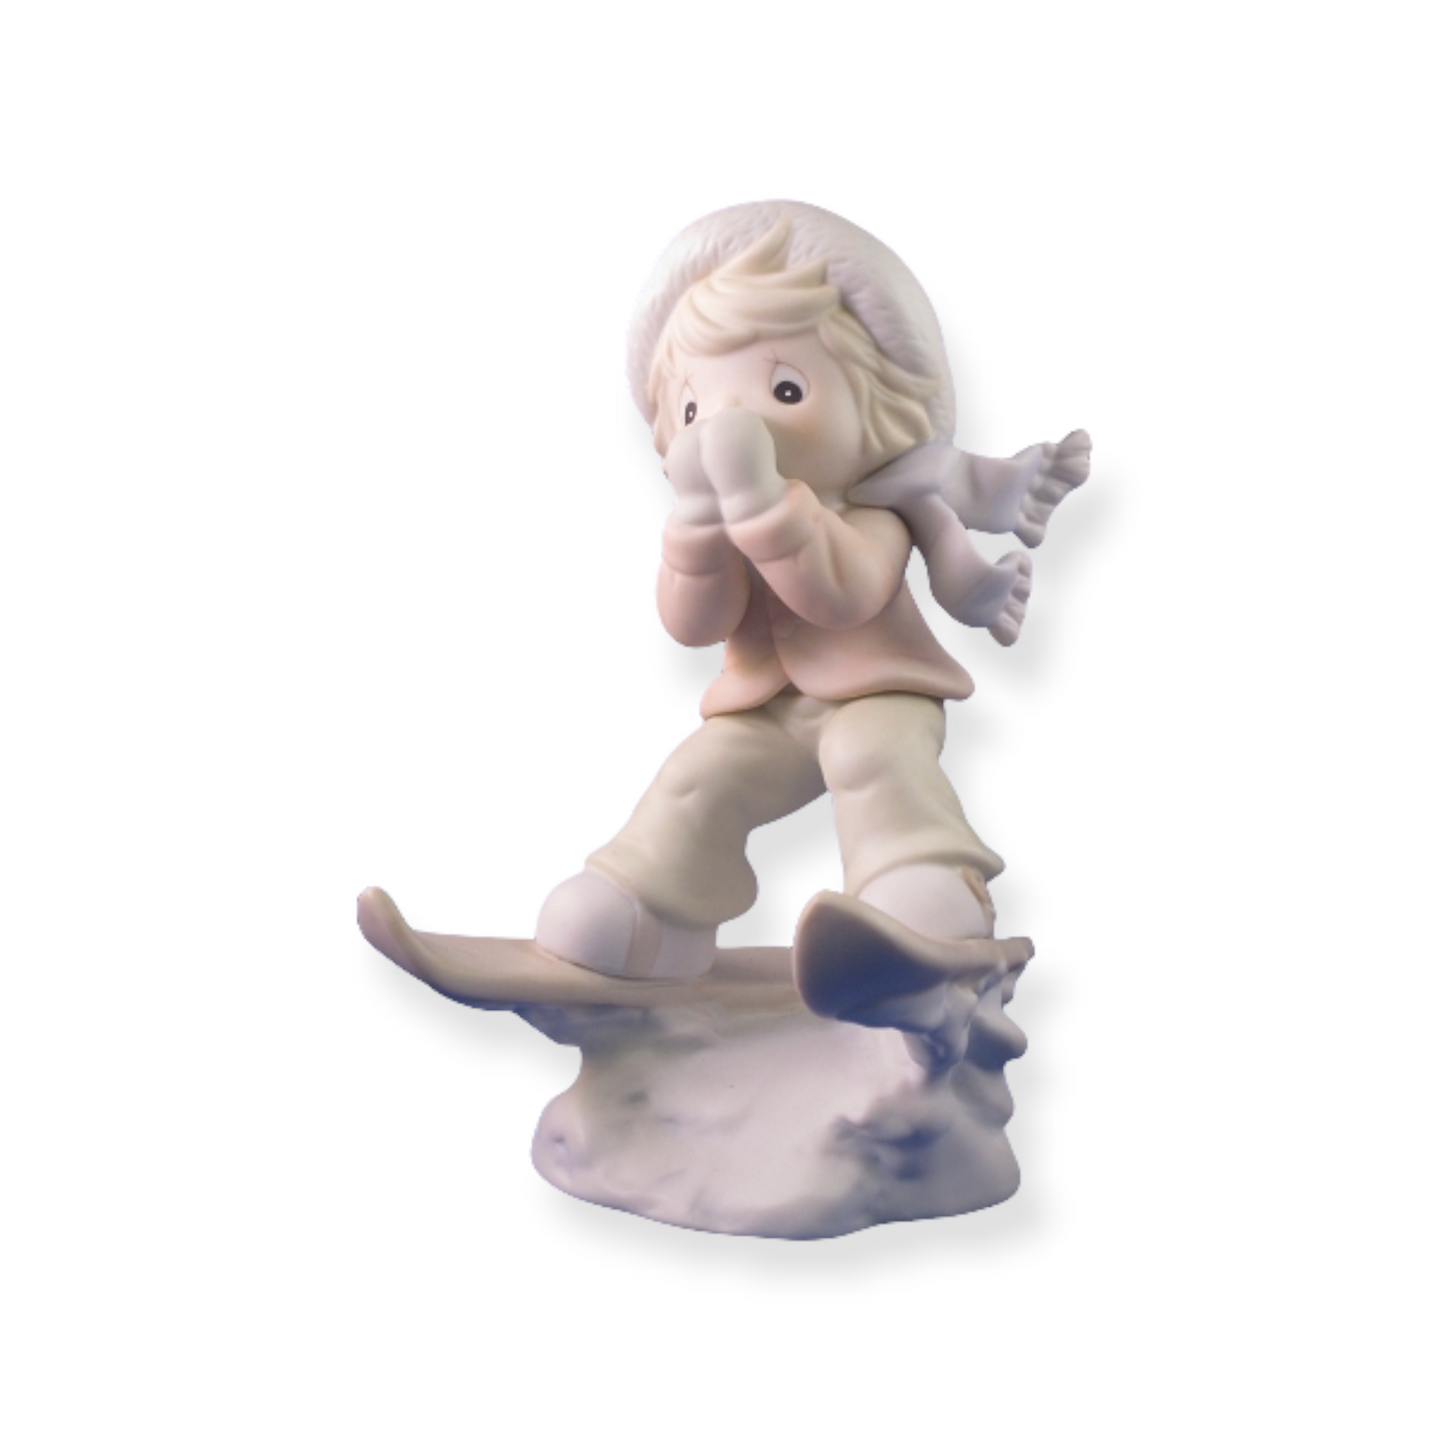 It's So Uplifting To Have A Friend Like You - Precious Moment Figurine